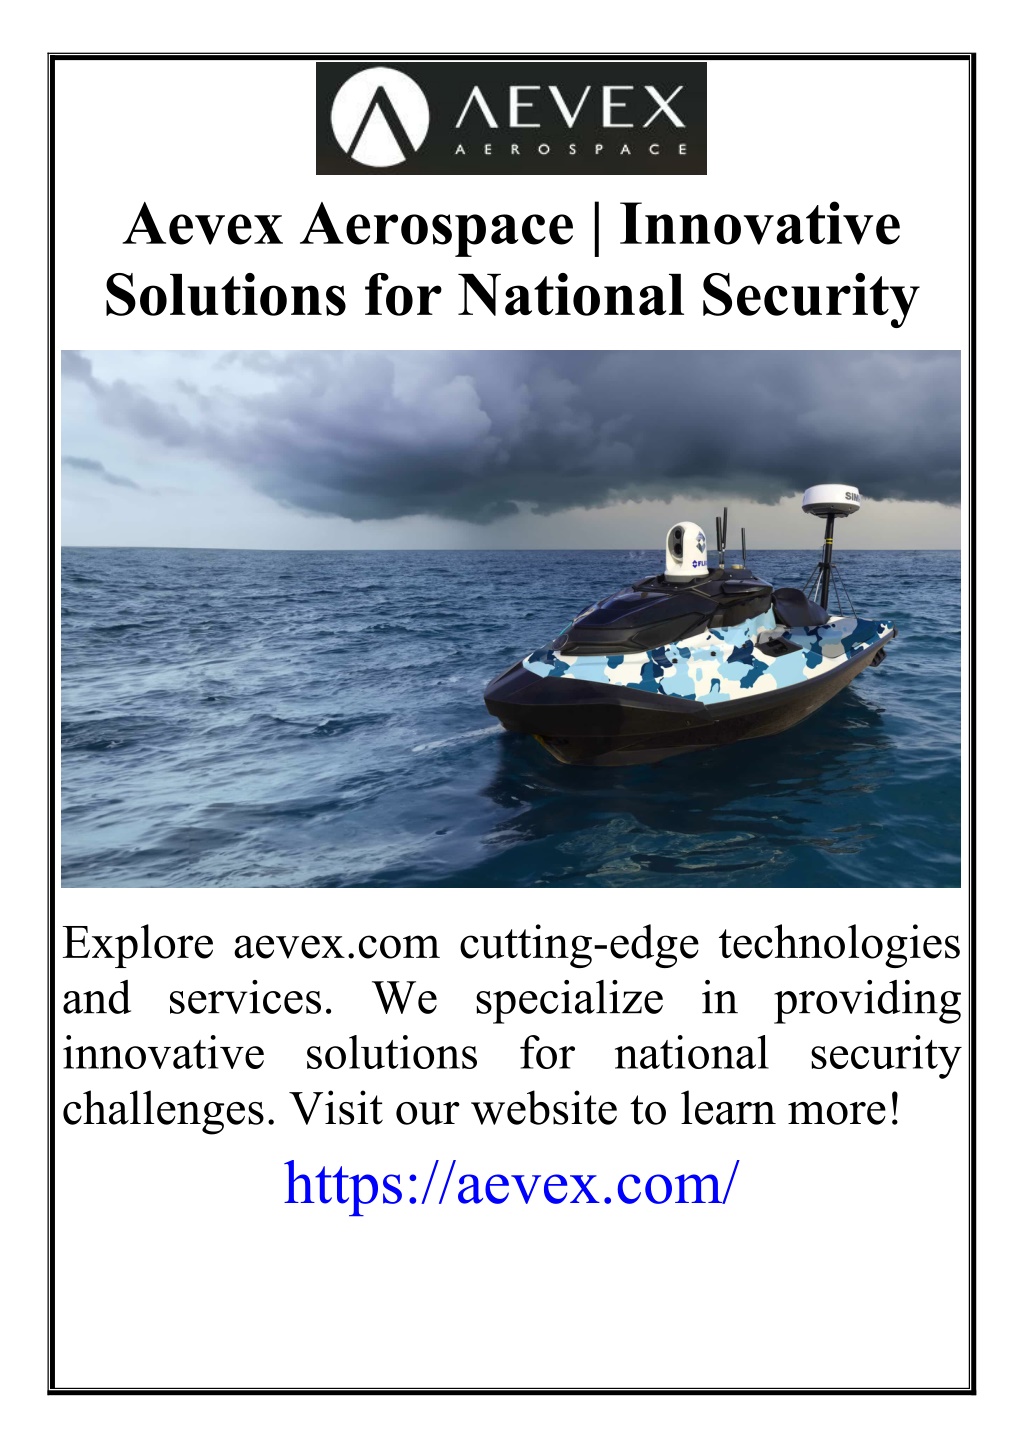 aevex aerospace innovative solutions for national l.w